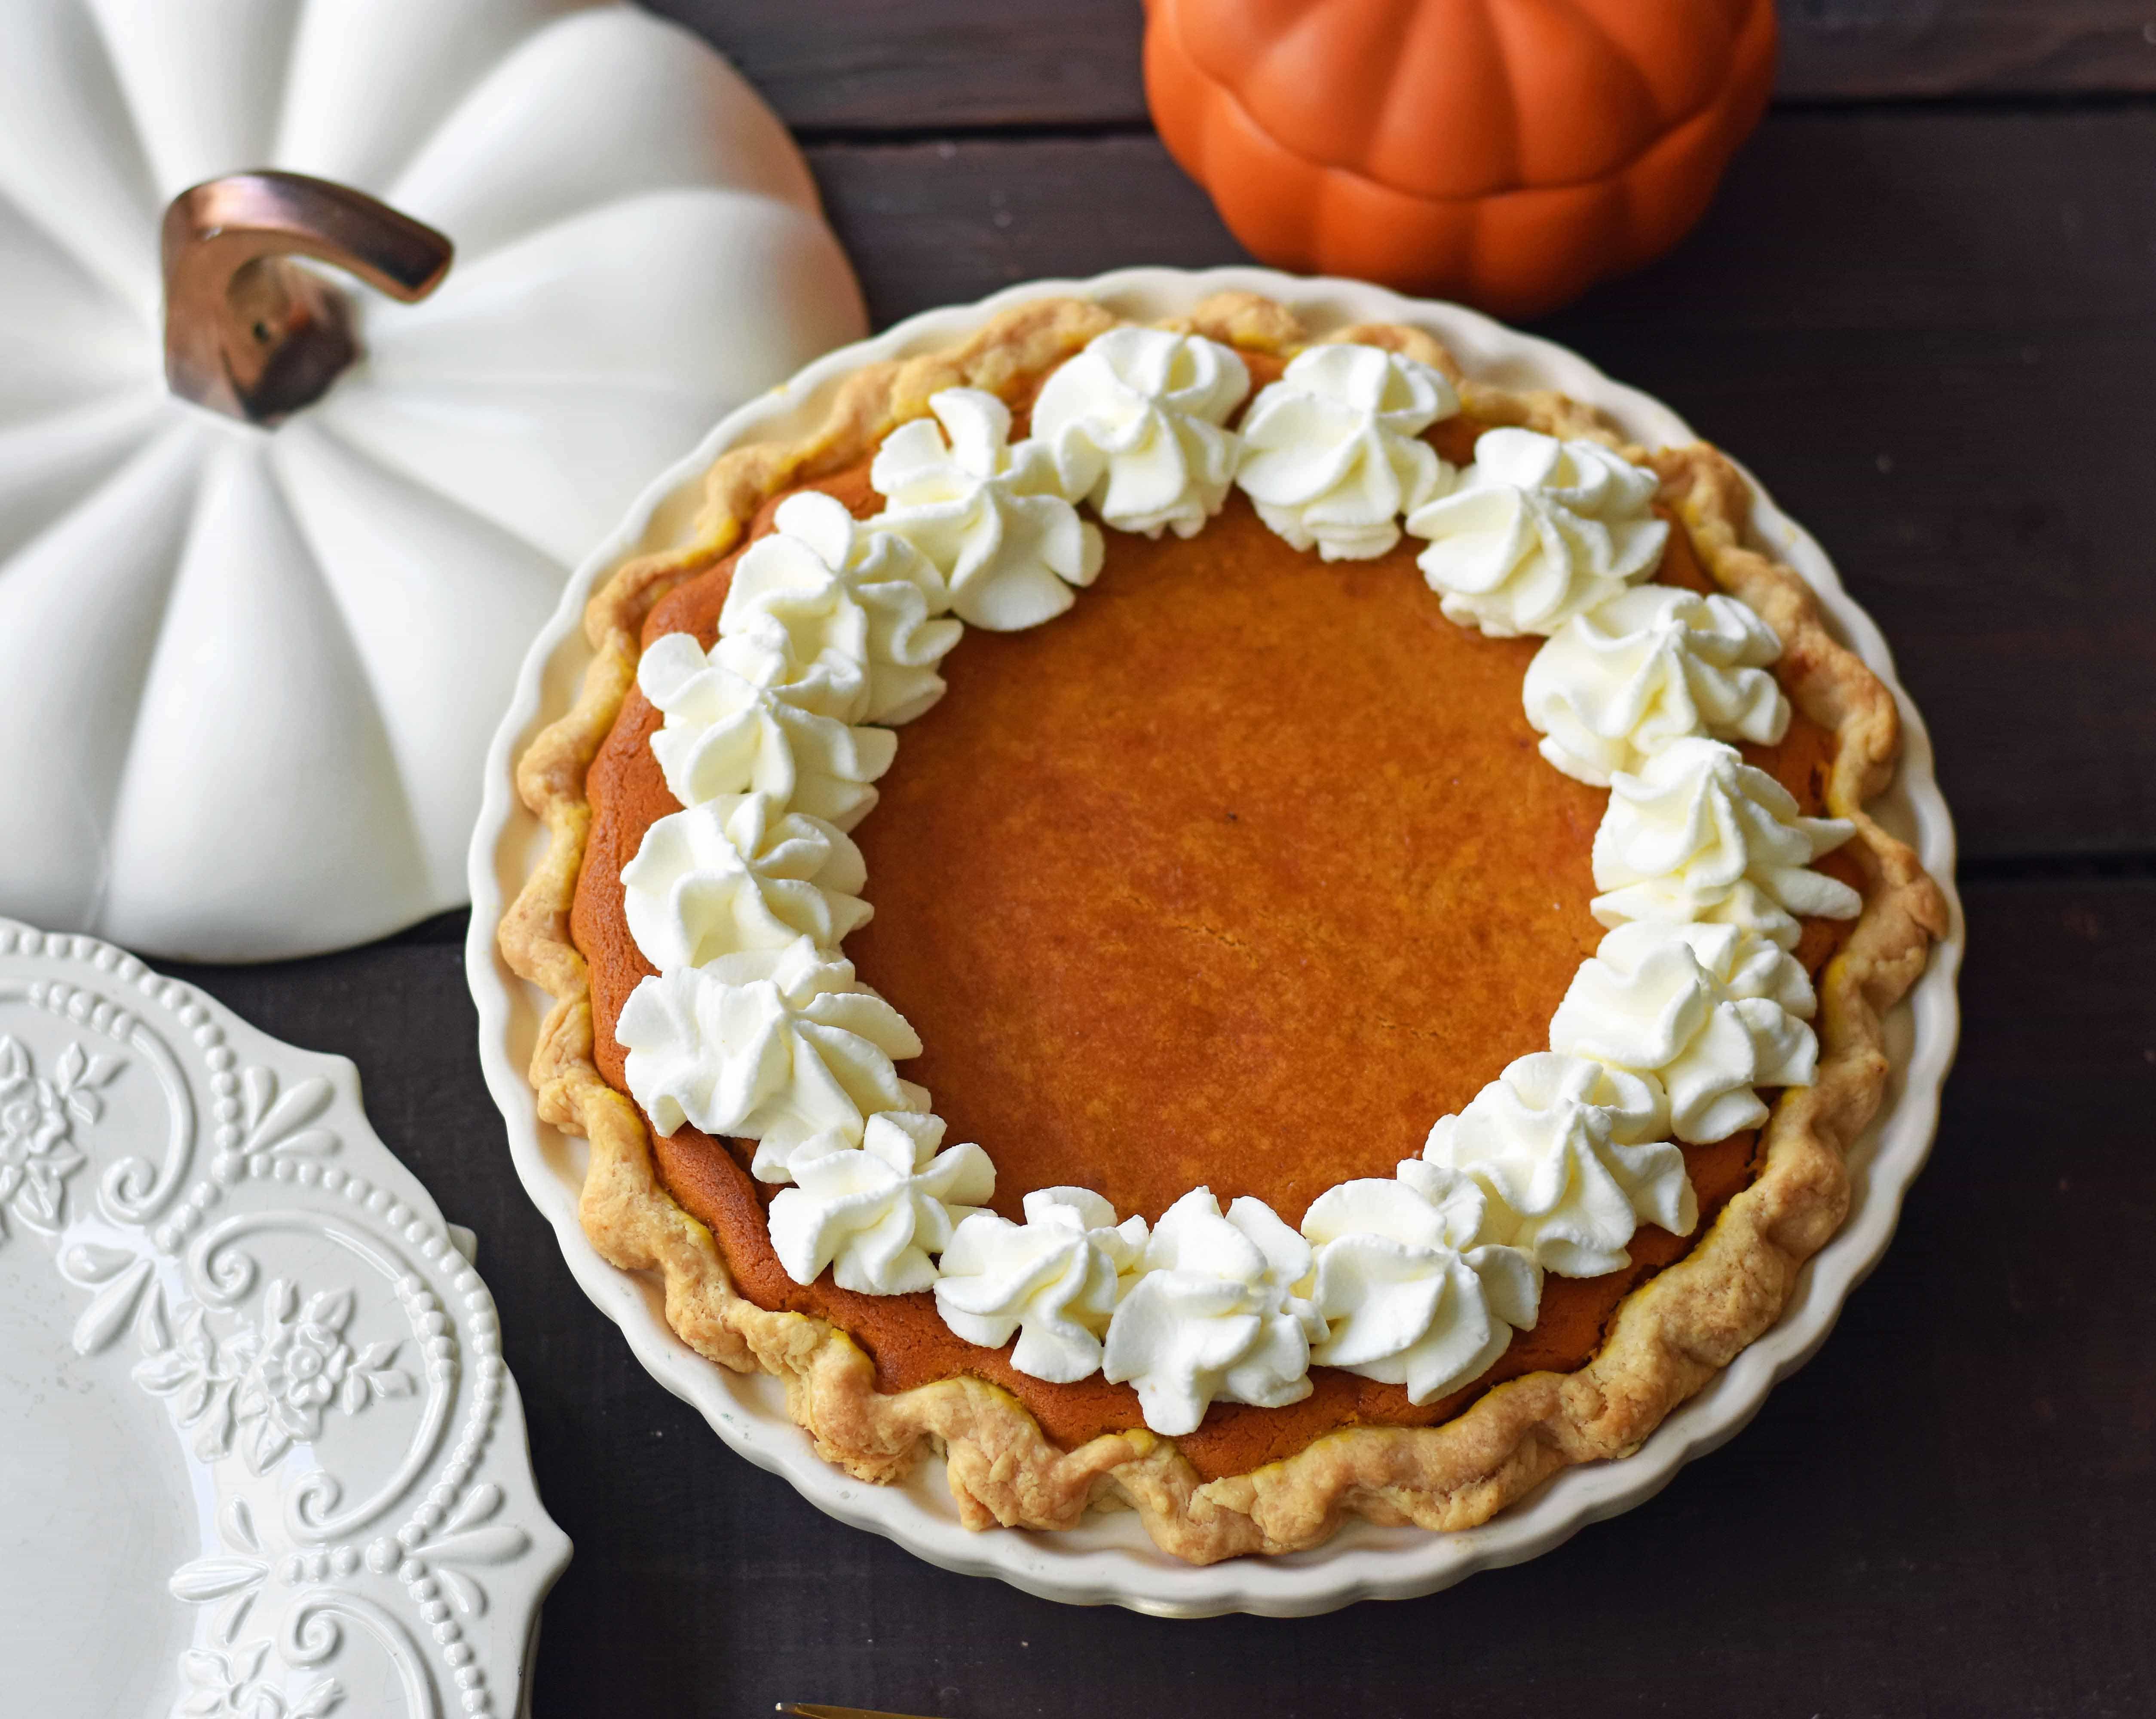 The Best Pumpkin Pie Recipe with a Flaky Buttery Crust and Fresh Whipped Cream. A Pumpkin Cream Cheese Pie that is sweet and creamy. A perfect pumpkin pie! www.modernhoney.com